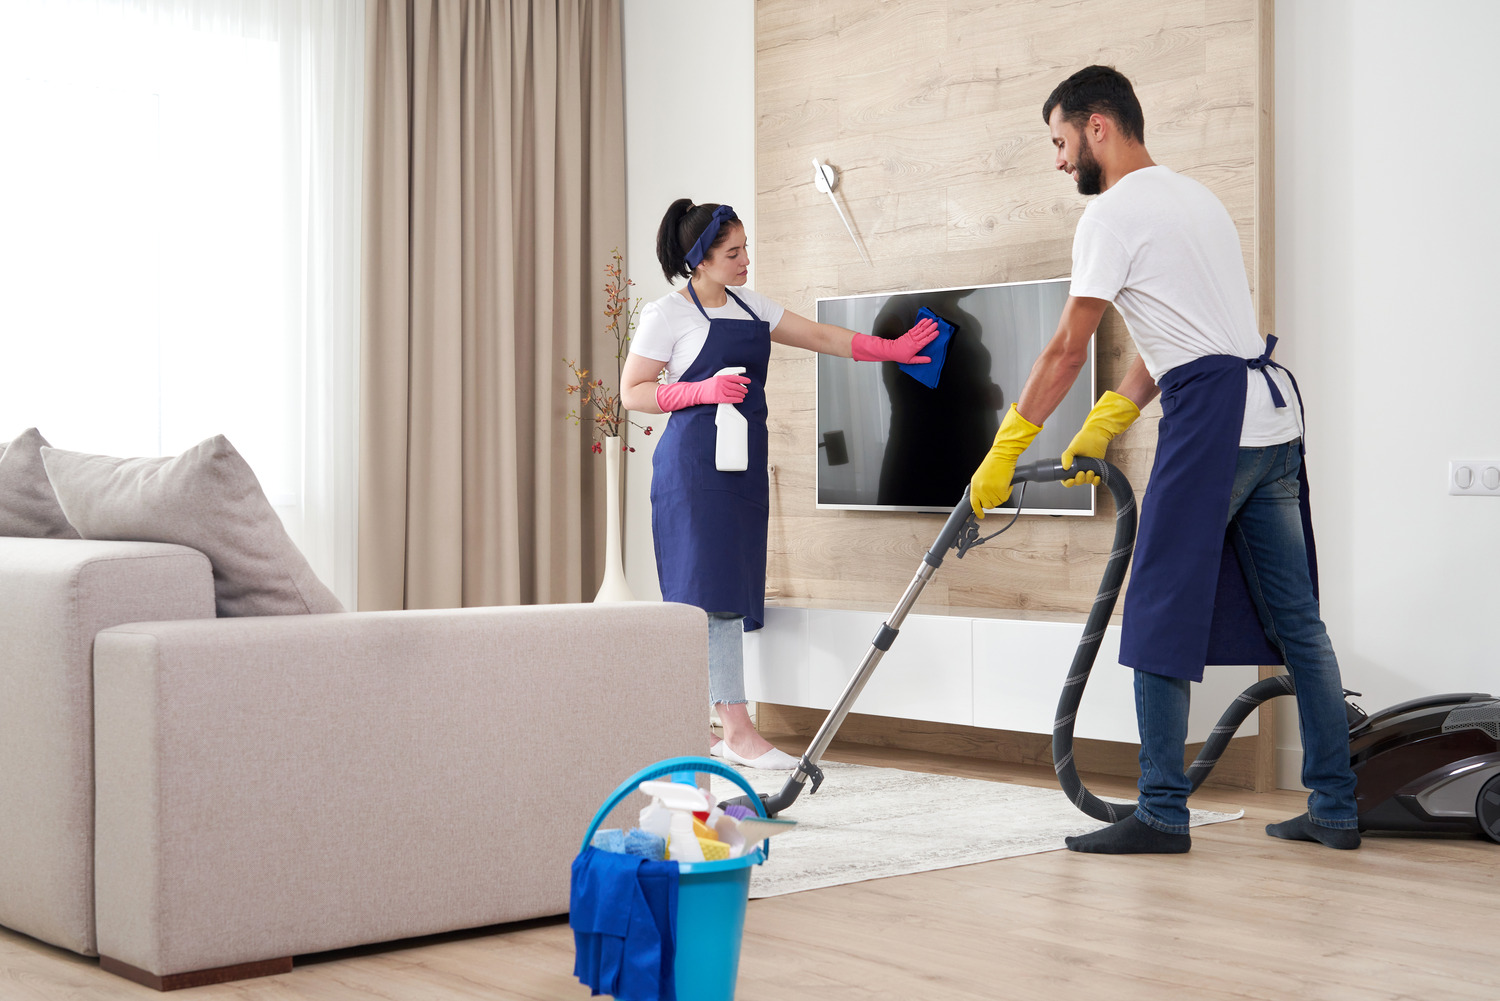 professional-cleaning-service-team-cleans-living-room-modern-apartment (2)